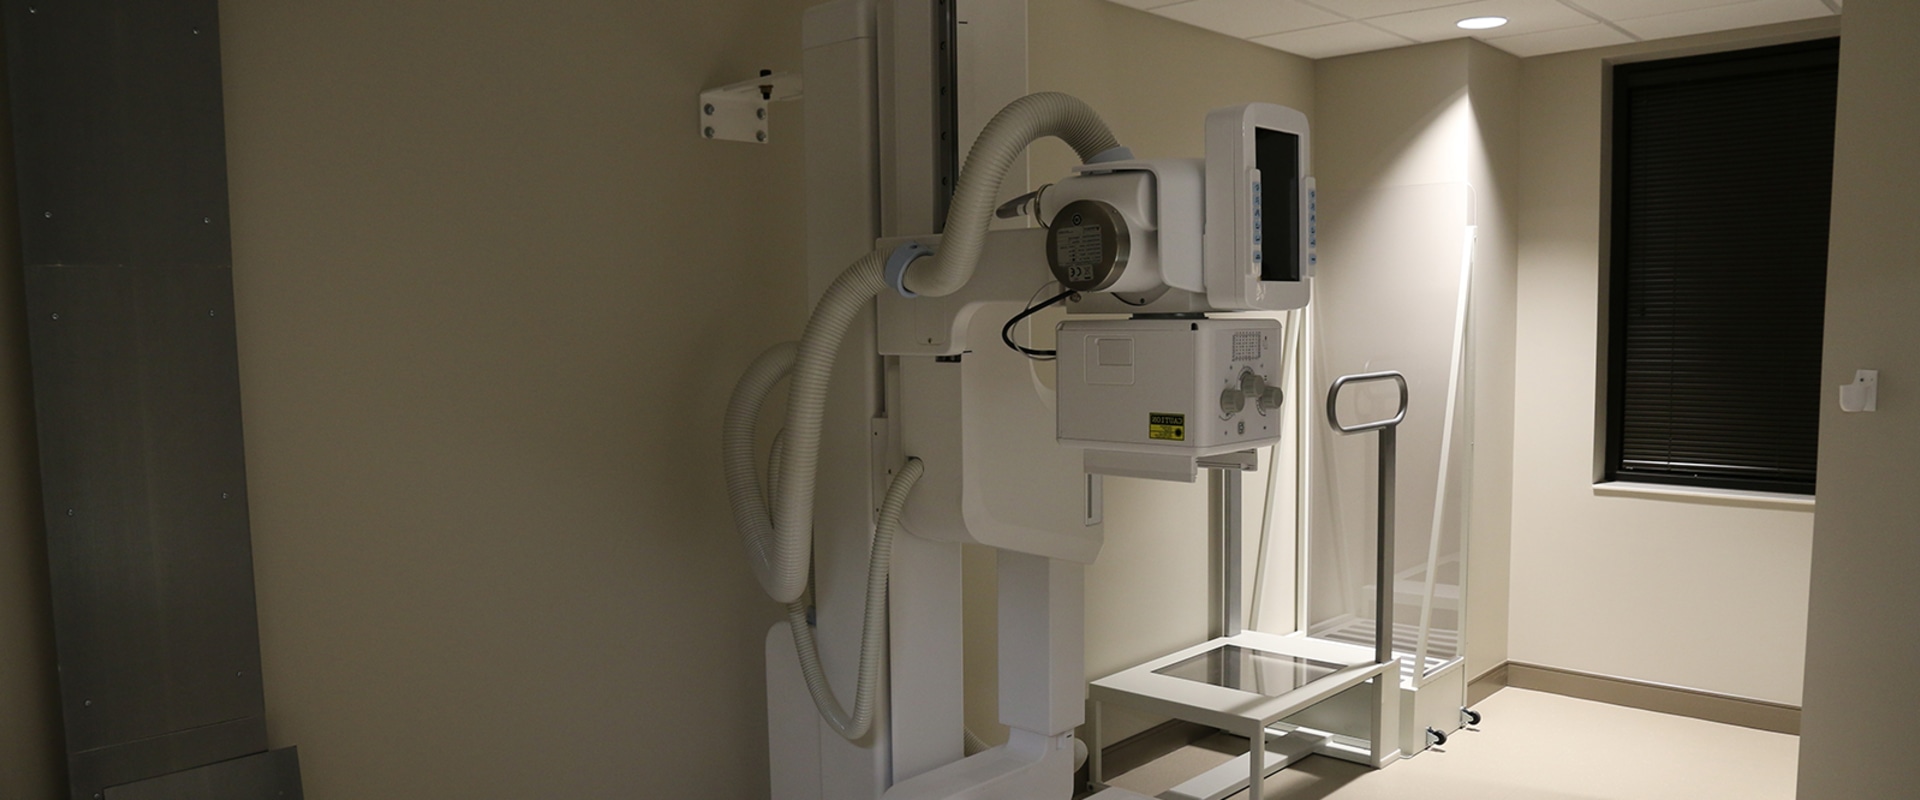 Mammography Services in Franklin, Tennessee: Get the Best Care Possible